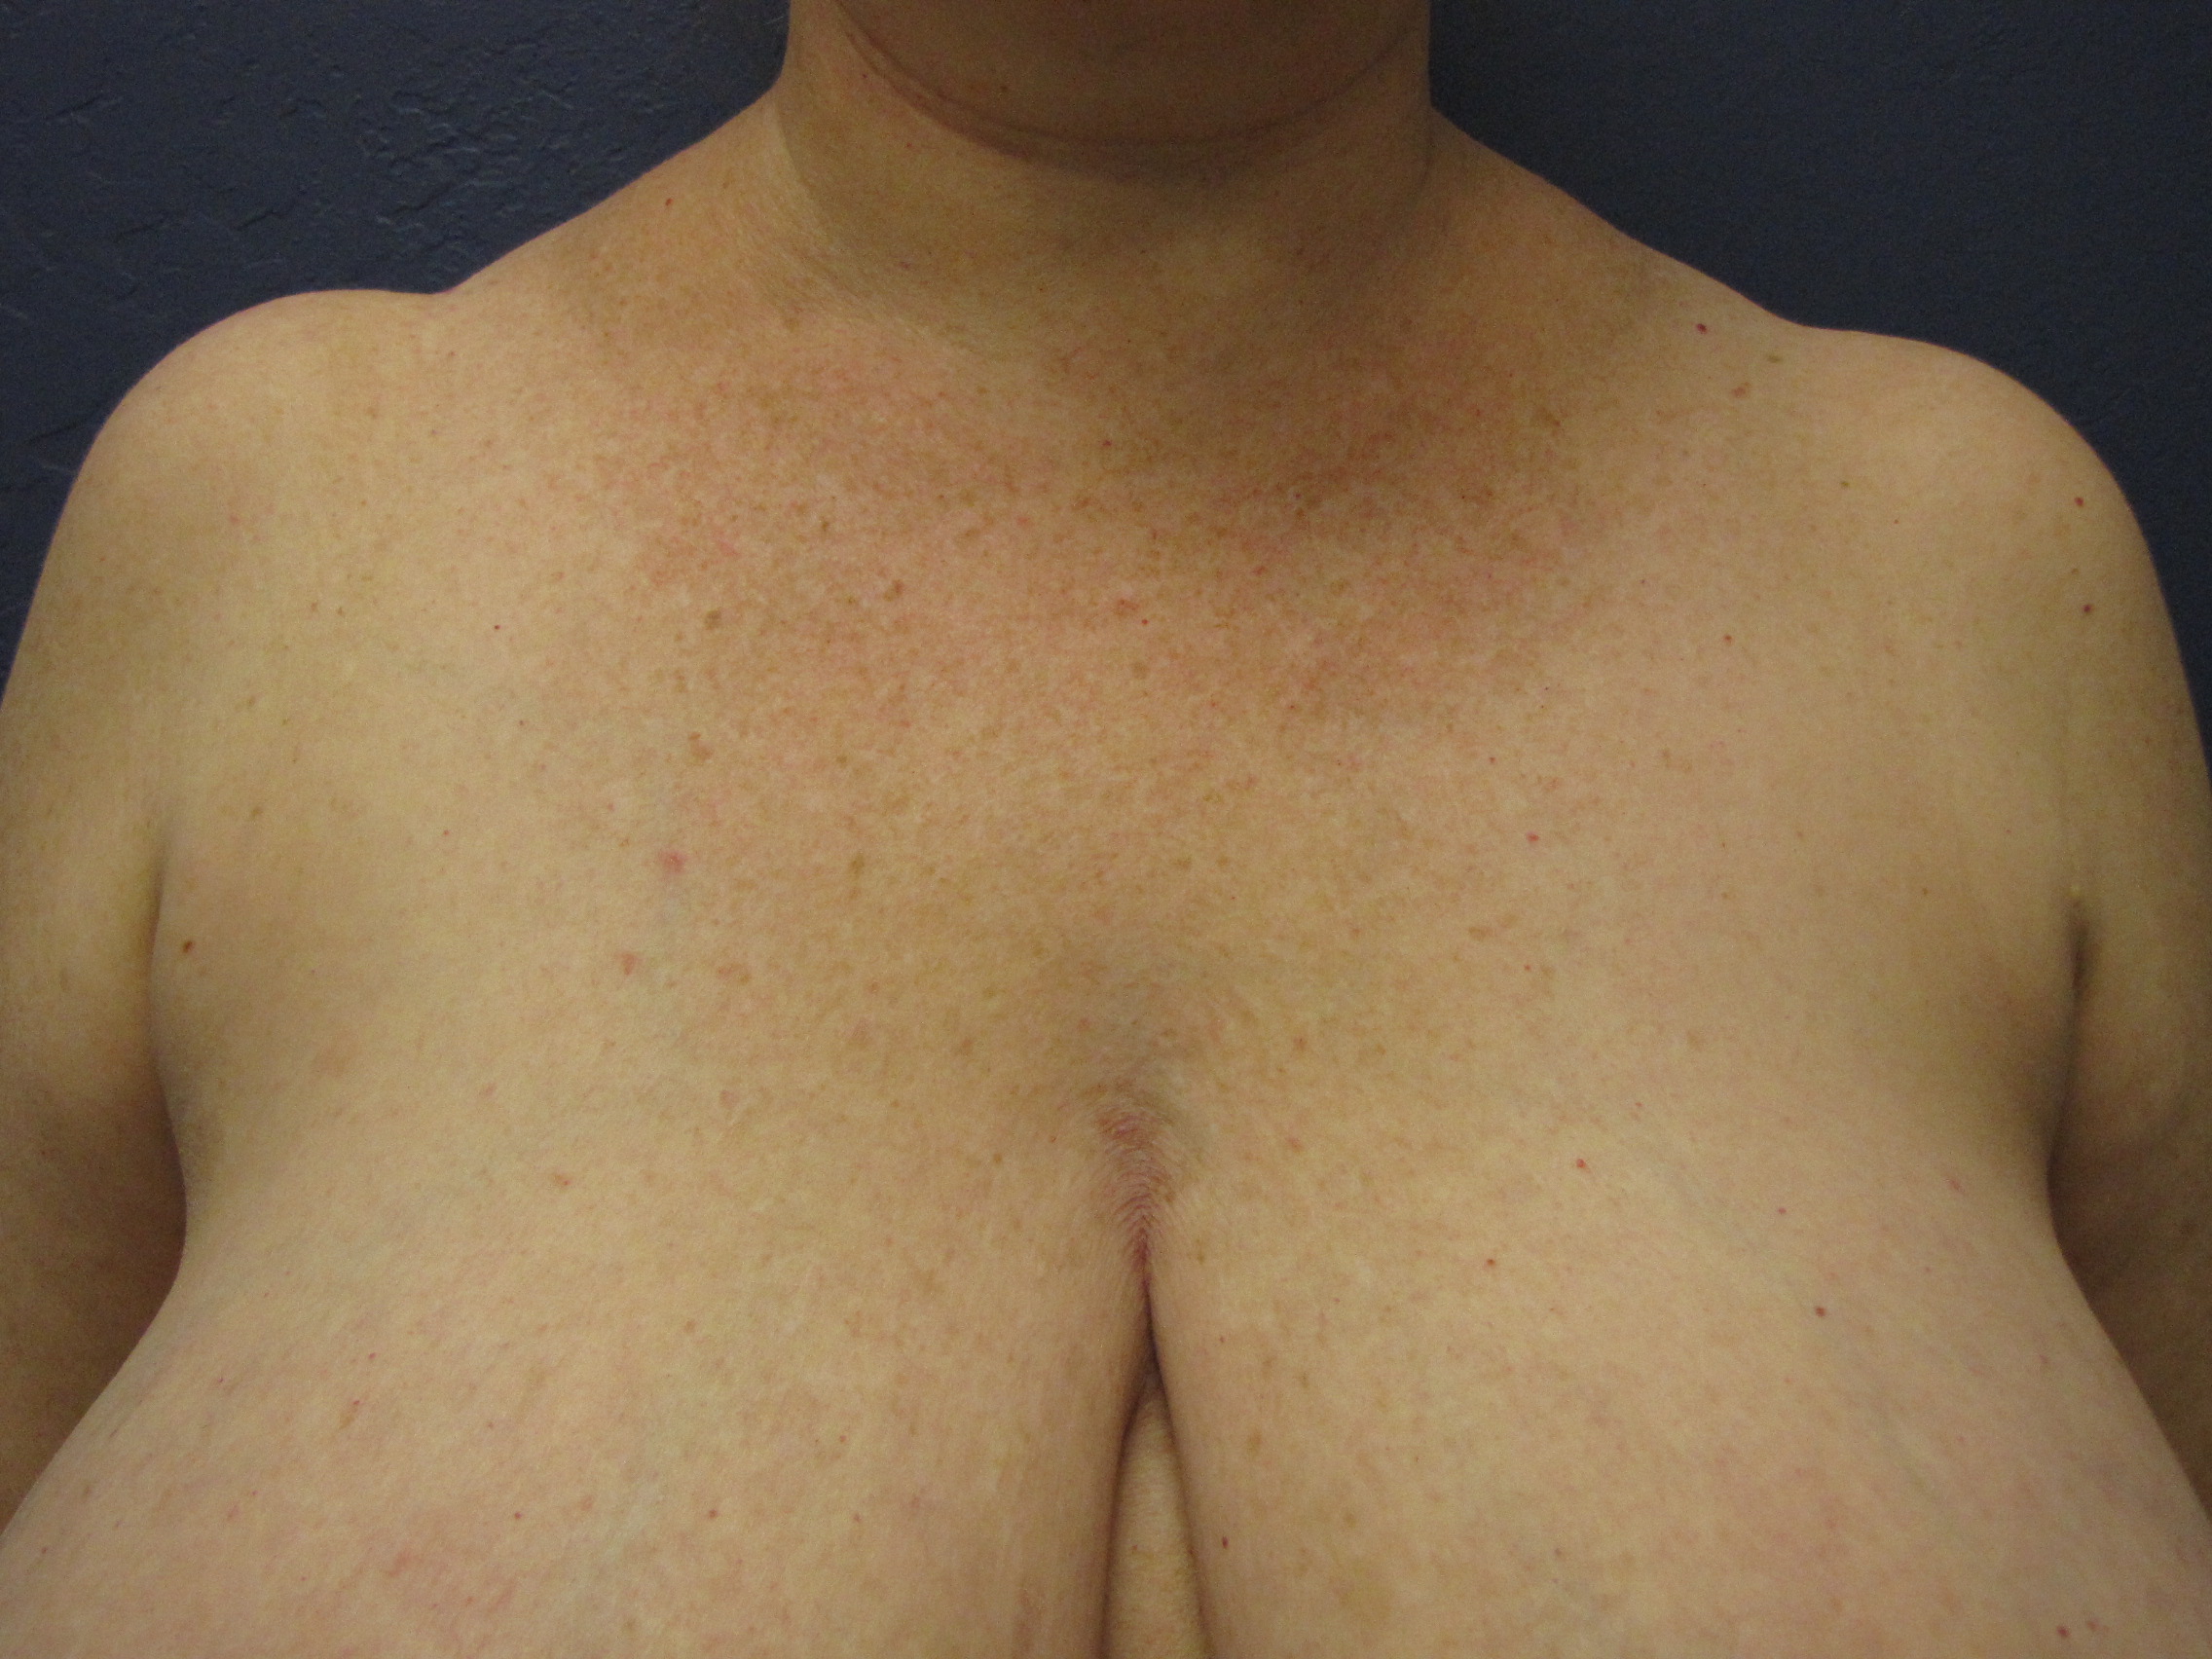 Autologous Fat Transfer for the Reconstruction of Brassiere Strap